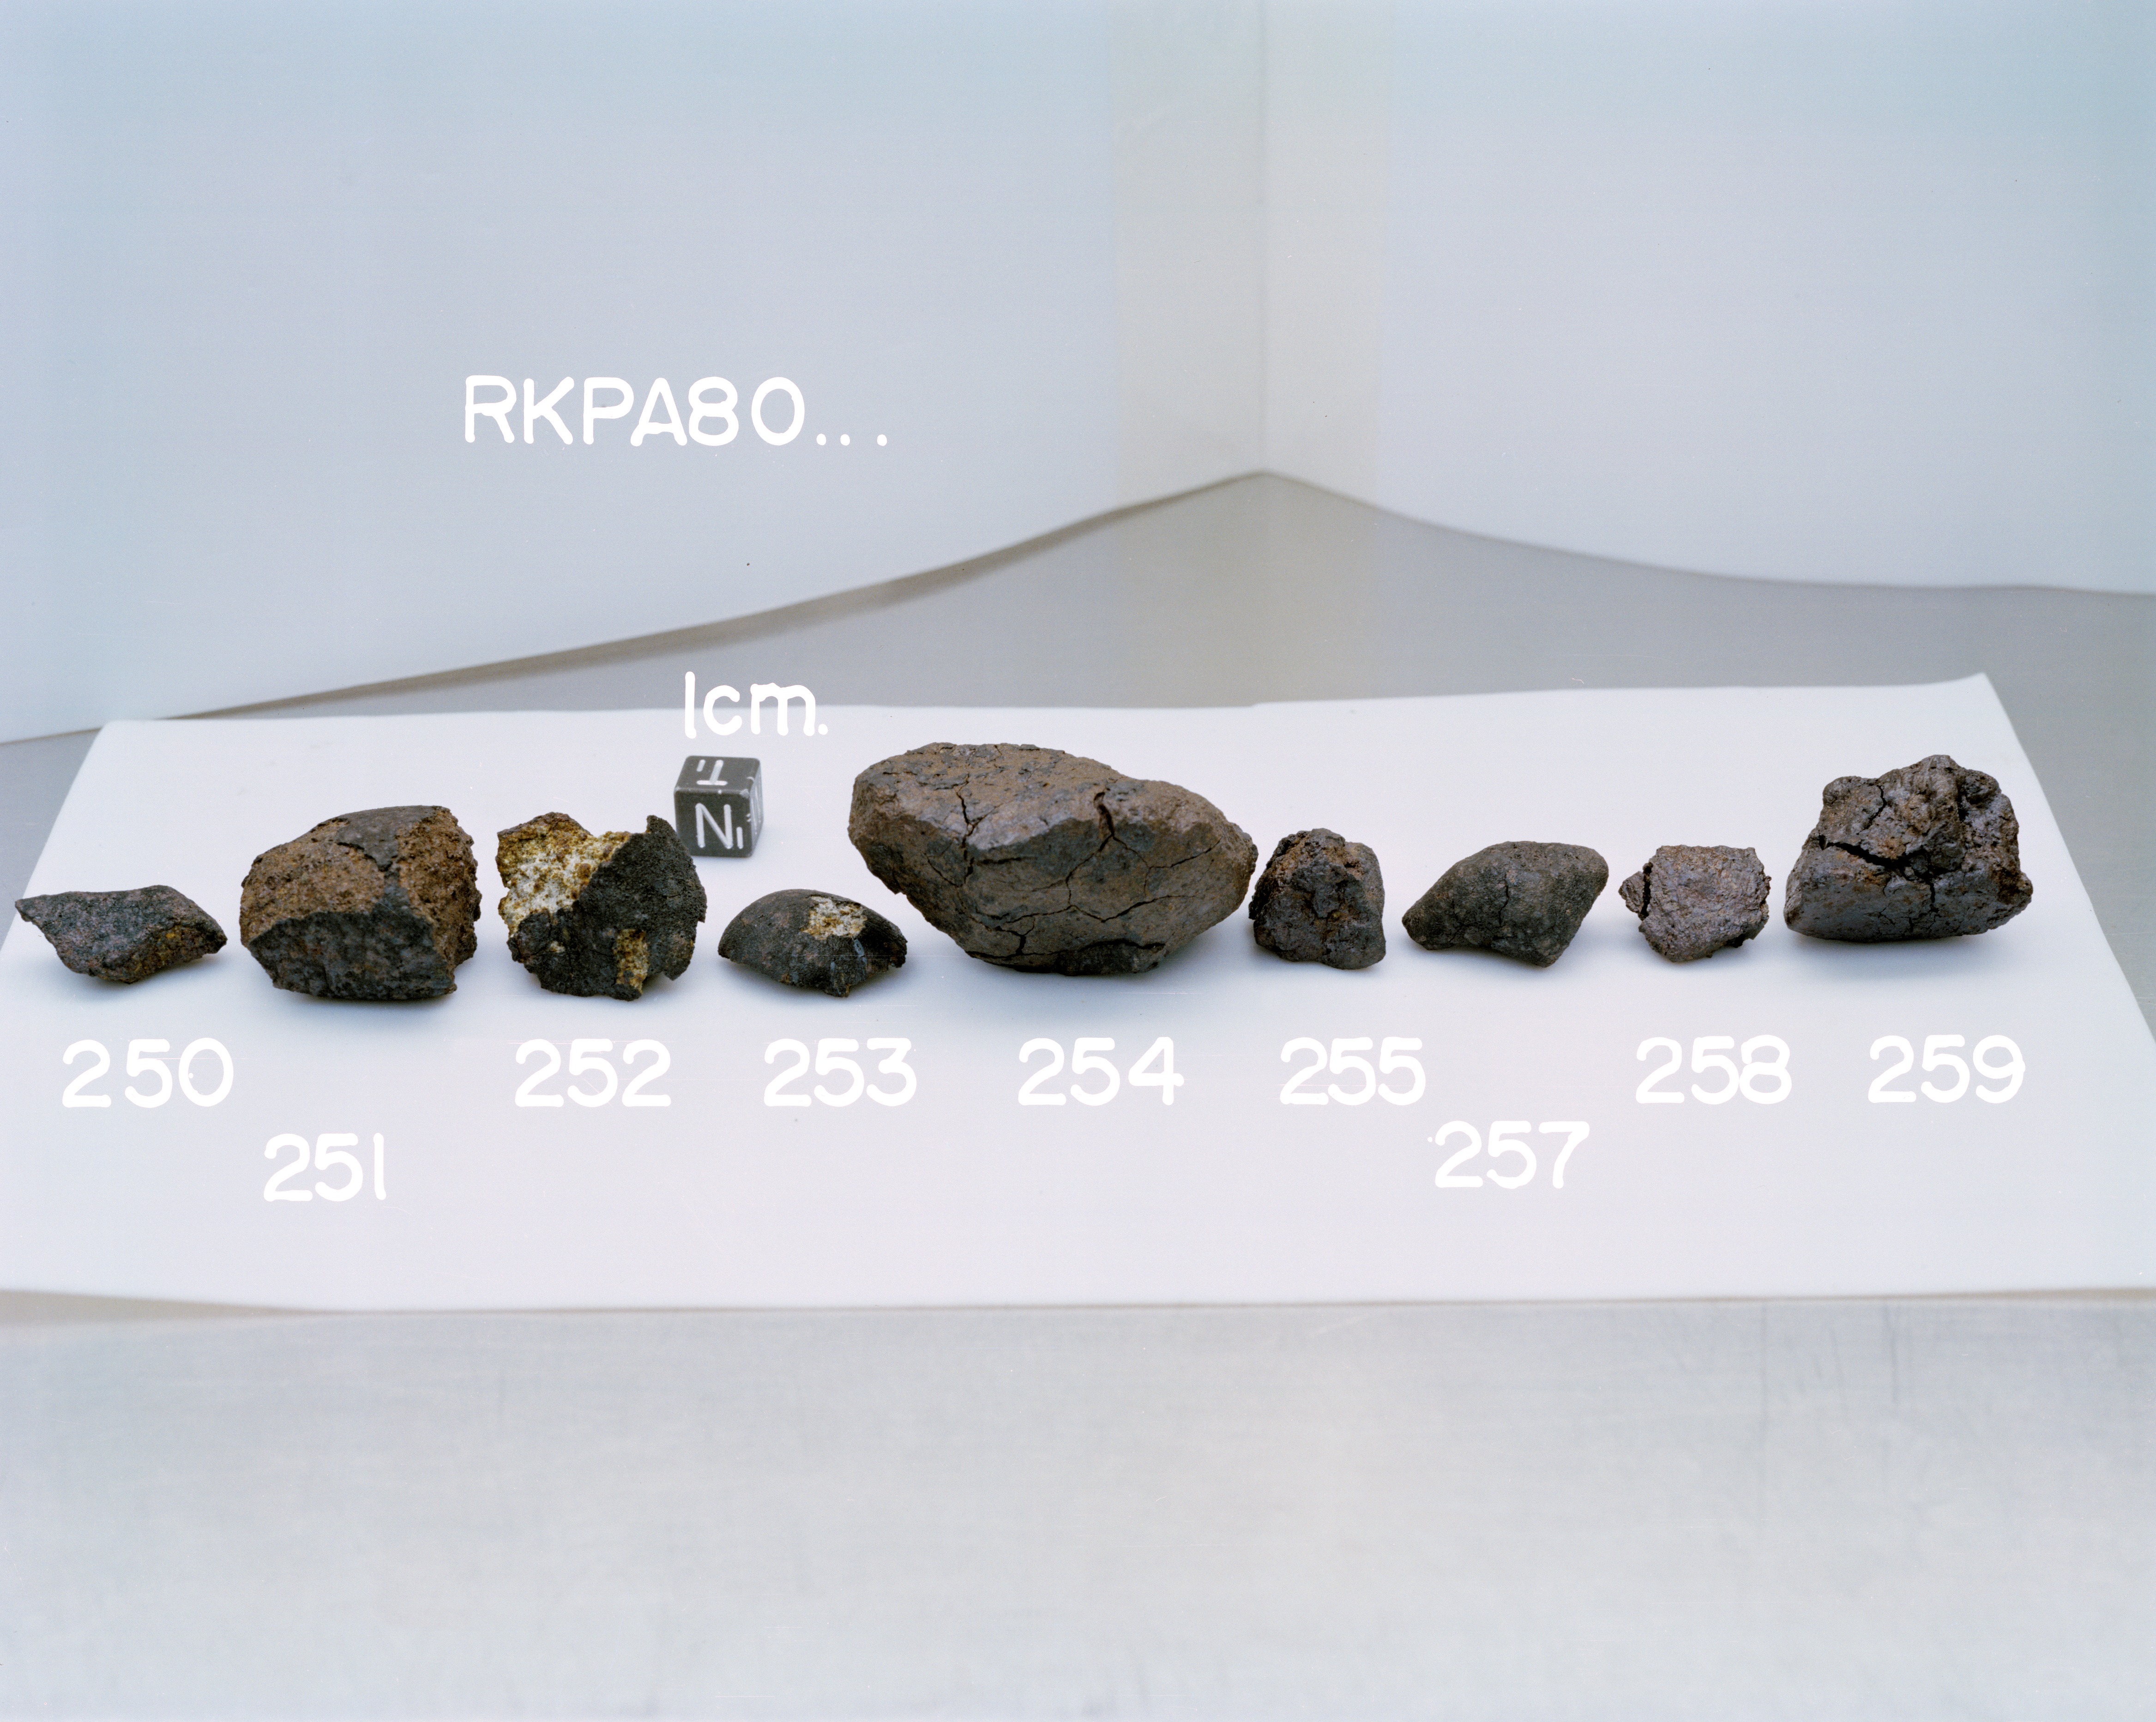 Group Photograph of Samples RKPA80250-80259 (North View)